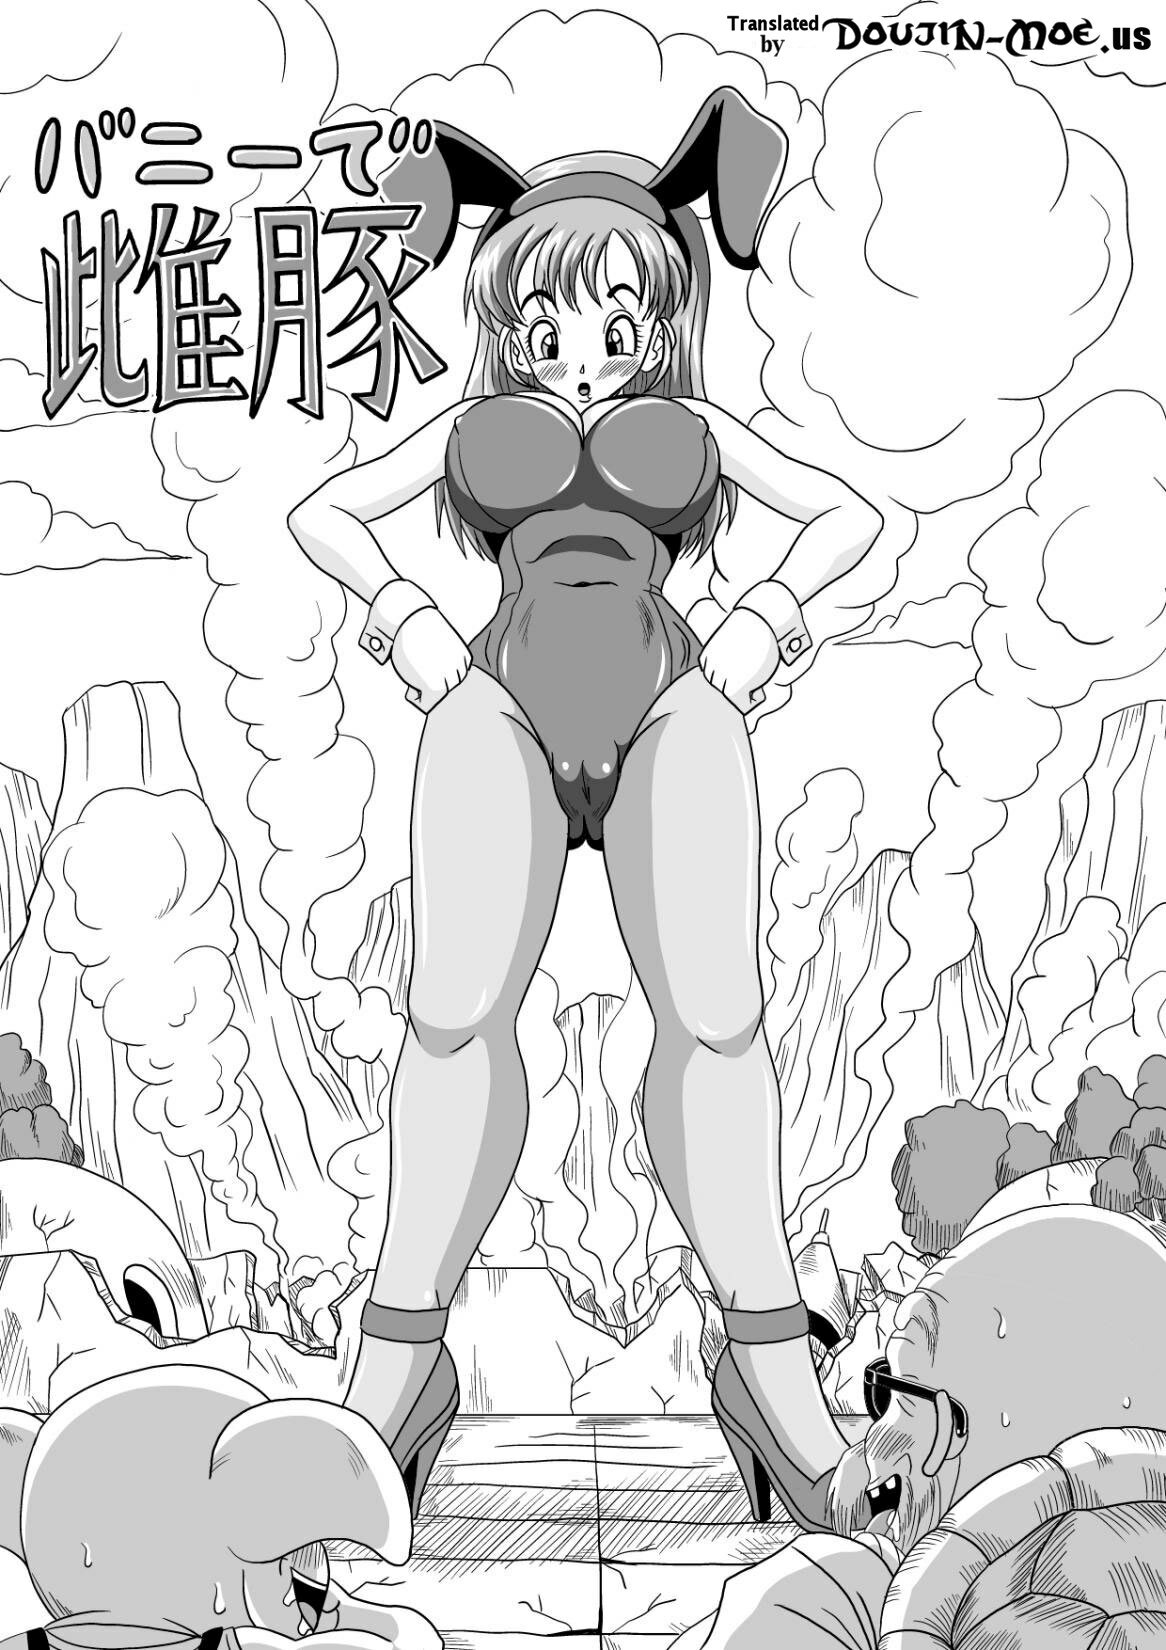 [Pyramid House] Sow in the Bunny (Dragon Ball) [English] {doujin-moe} page 5 full